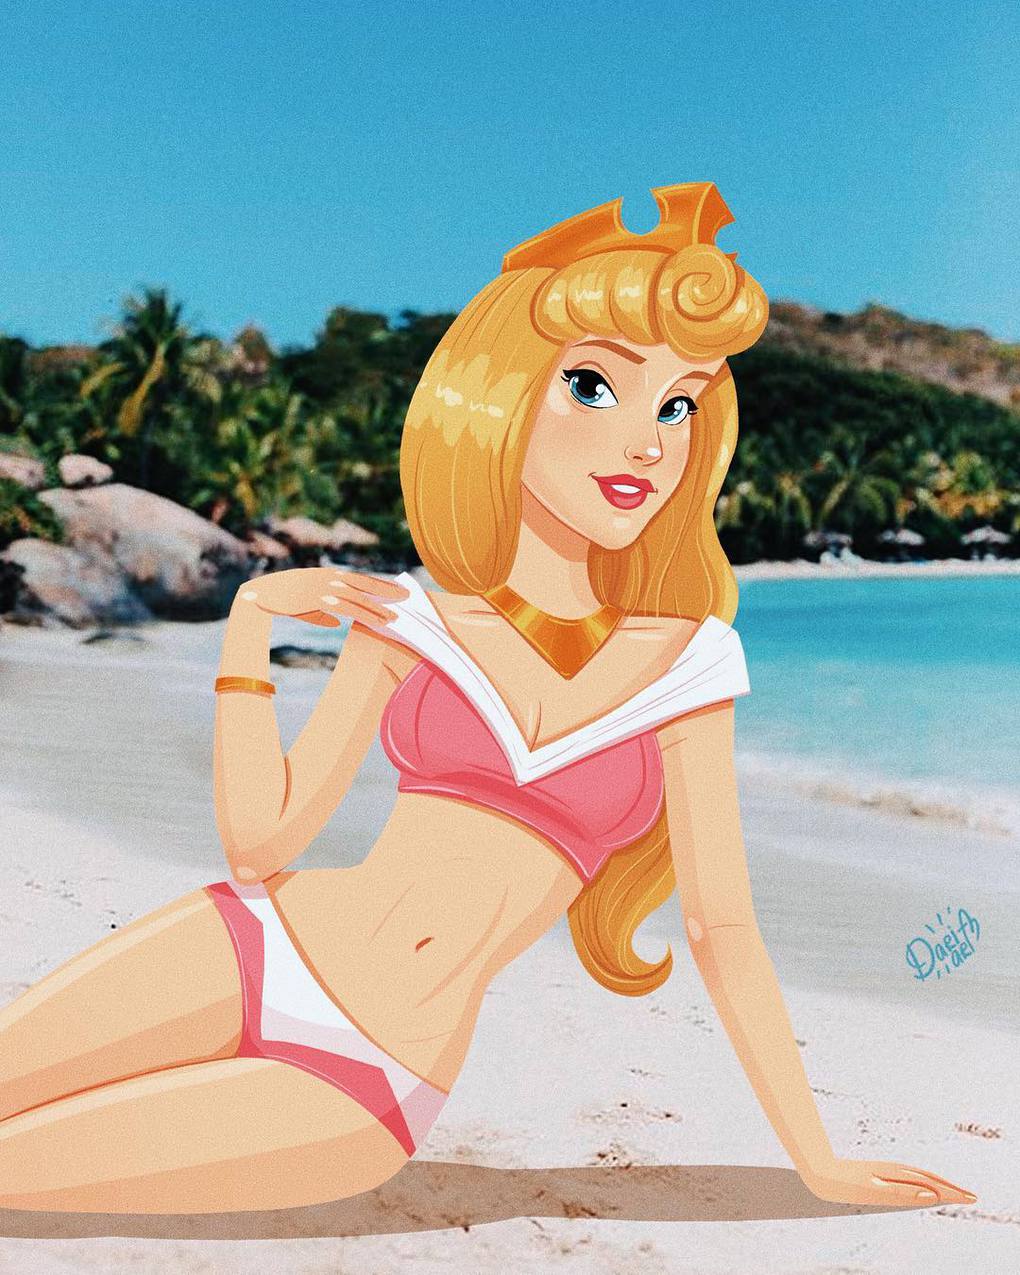 Disney Princess in swimsuits with real 